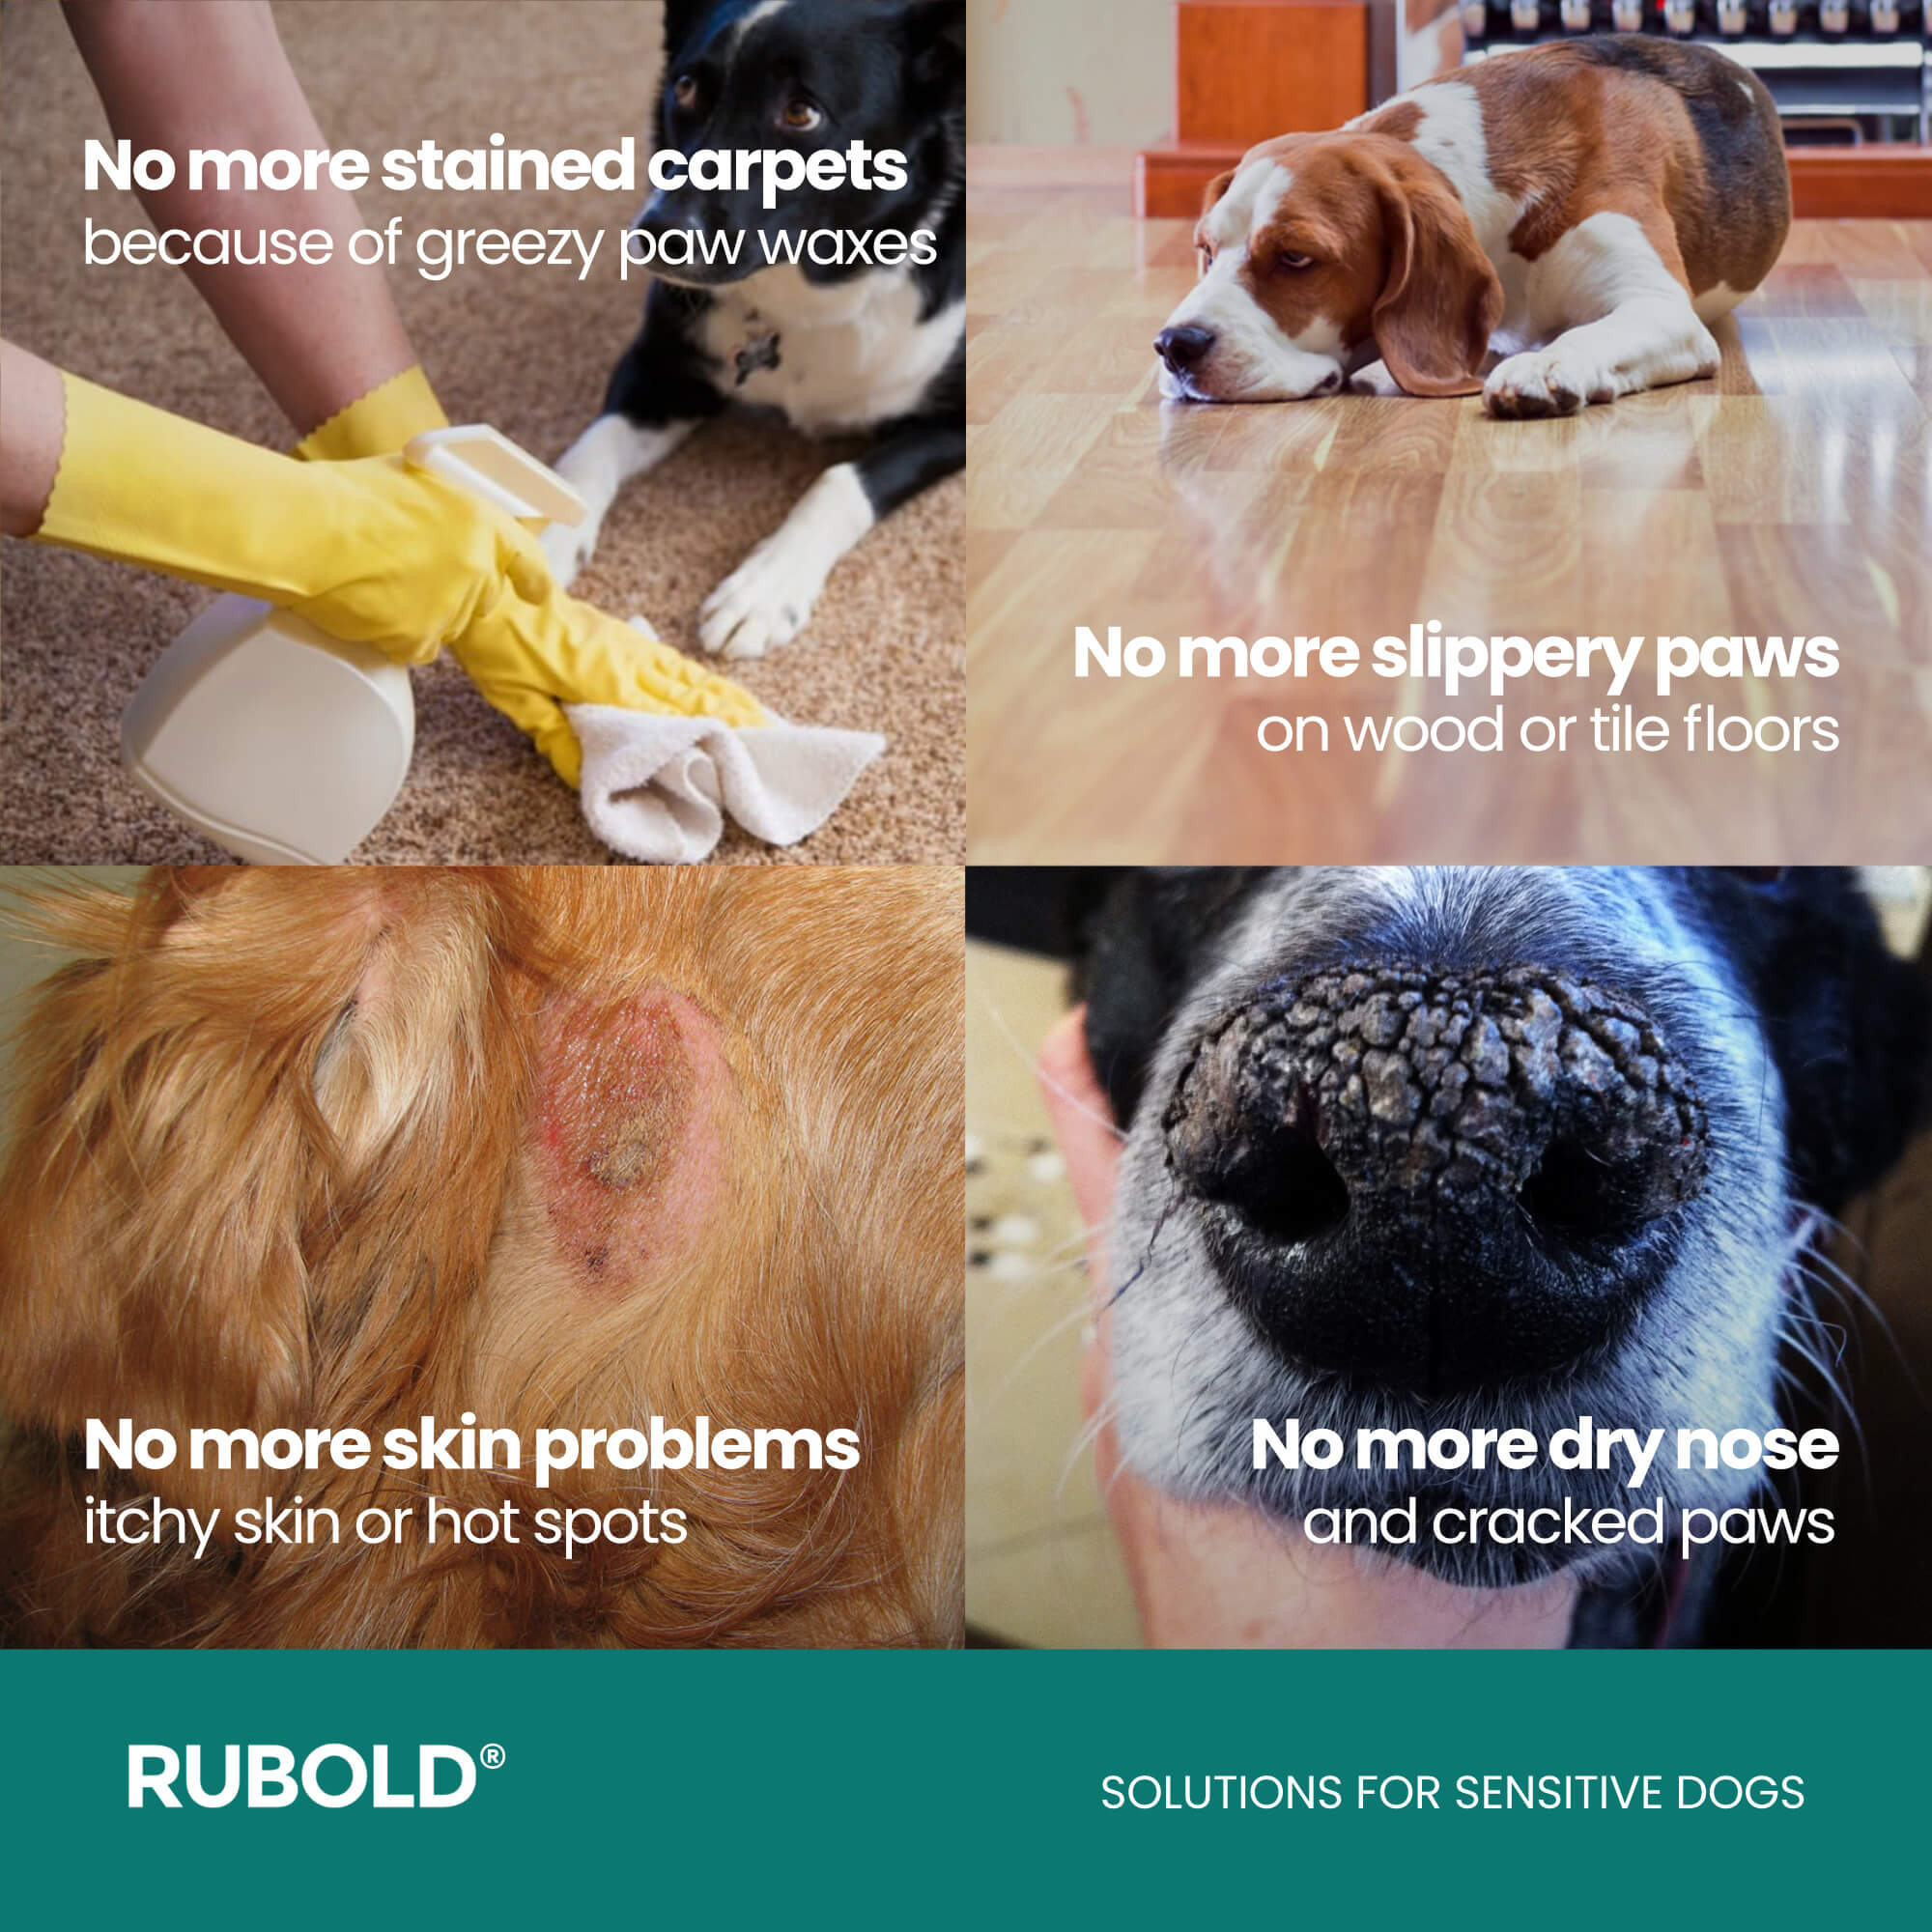 Natural Skin+ Nose and Dog Paw Balm - RUBOLD Dog Products for Pet Parents